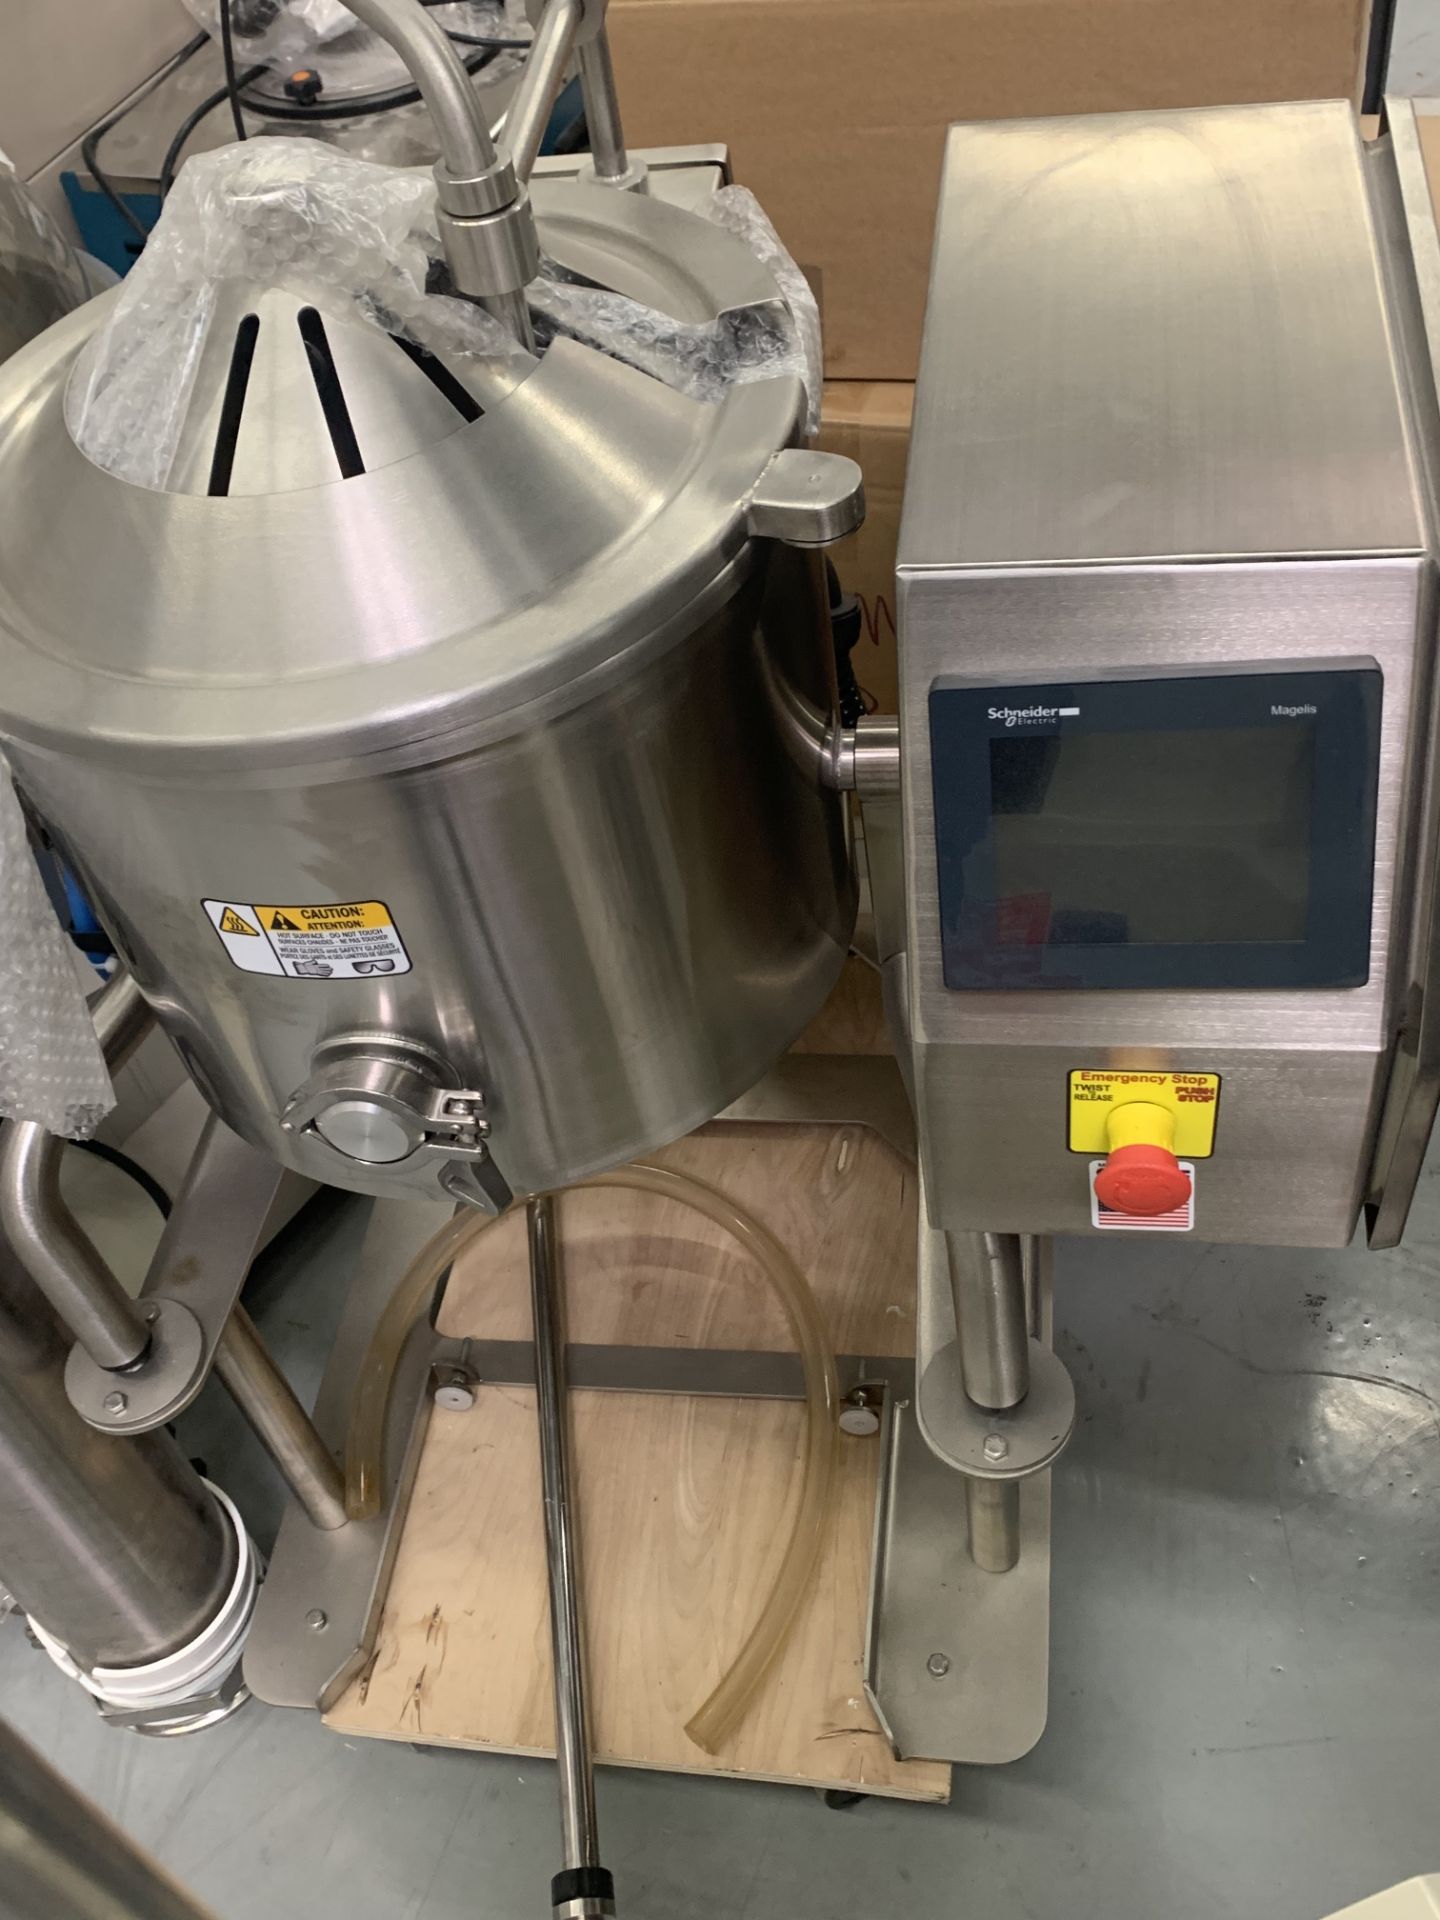 New/Unused Savage Bros Table-Top Automatic Cooker Mixer w/ PLC Control. Model 2410 / FireMixer-14 - Image 2 of 12